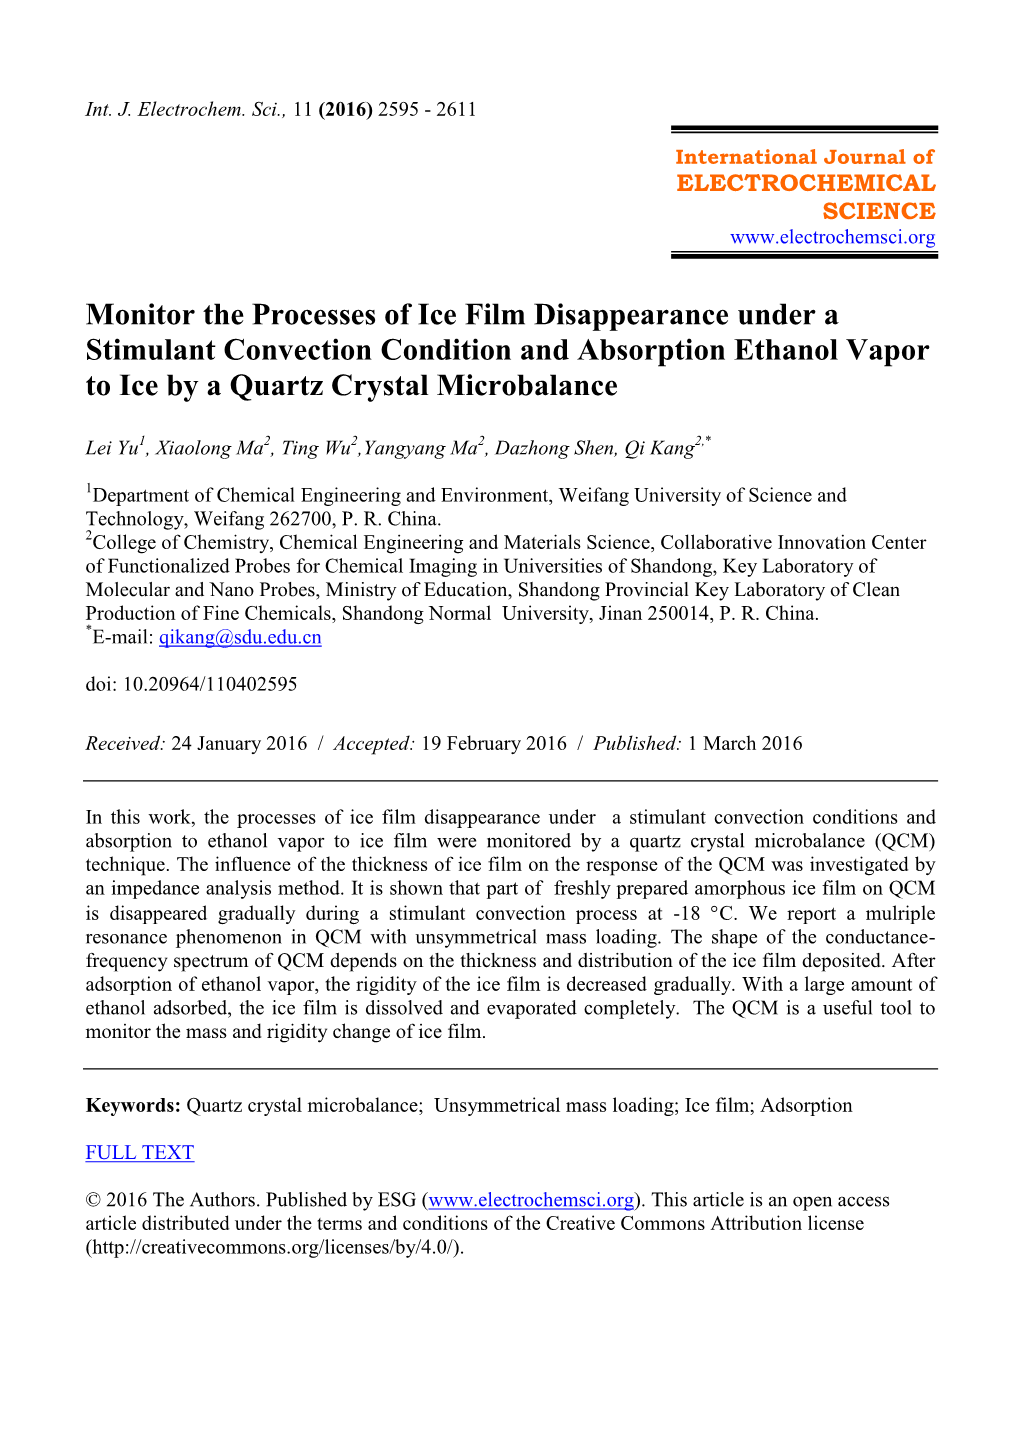 Monitor the Processes of Ice Film Disappearance Under a Stimulant Convection Condition and Absorption Ethanol Vapor to Ice by a Quartz Crystal Microbalance